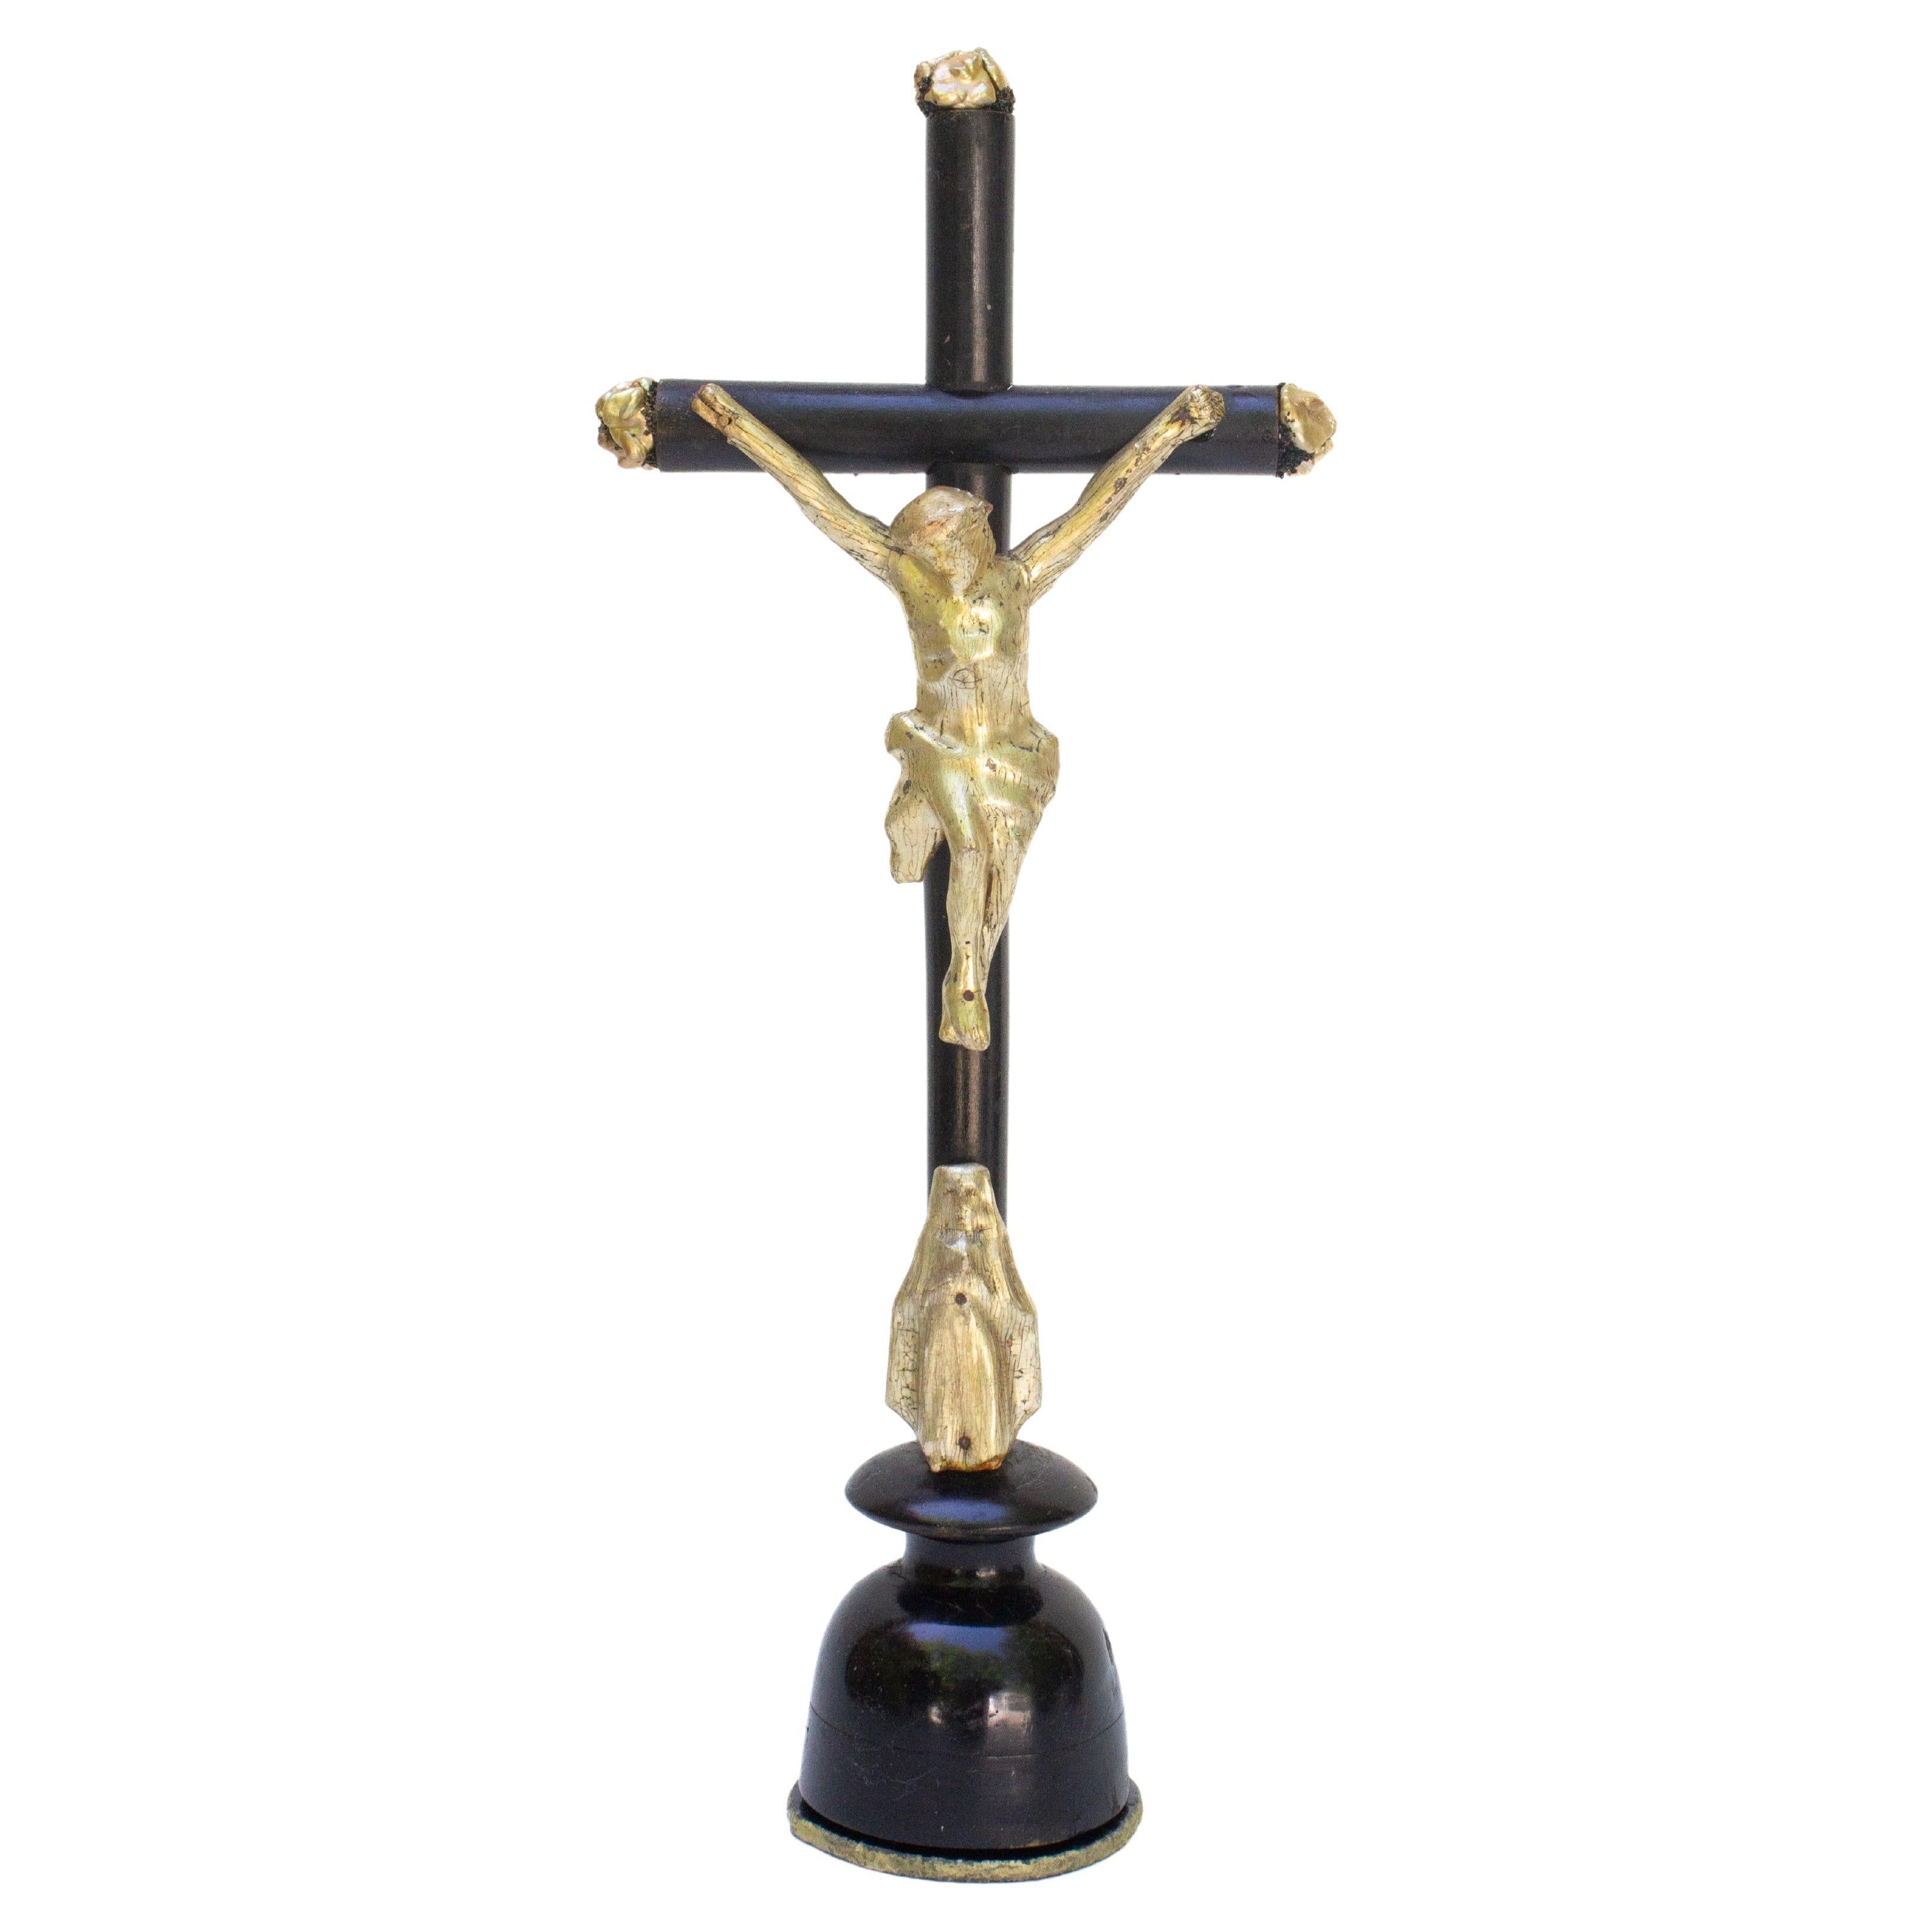 19th Century Italian Black Crucifix with a Pearlescent Gold Figure of Christ